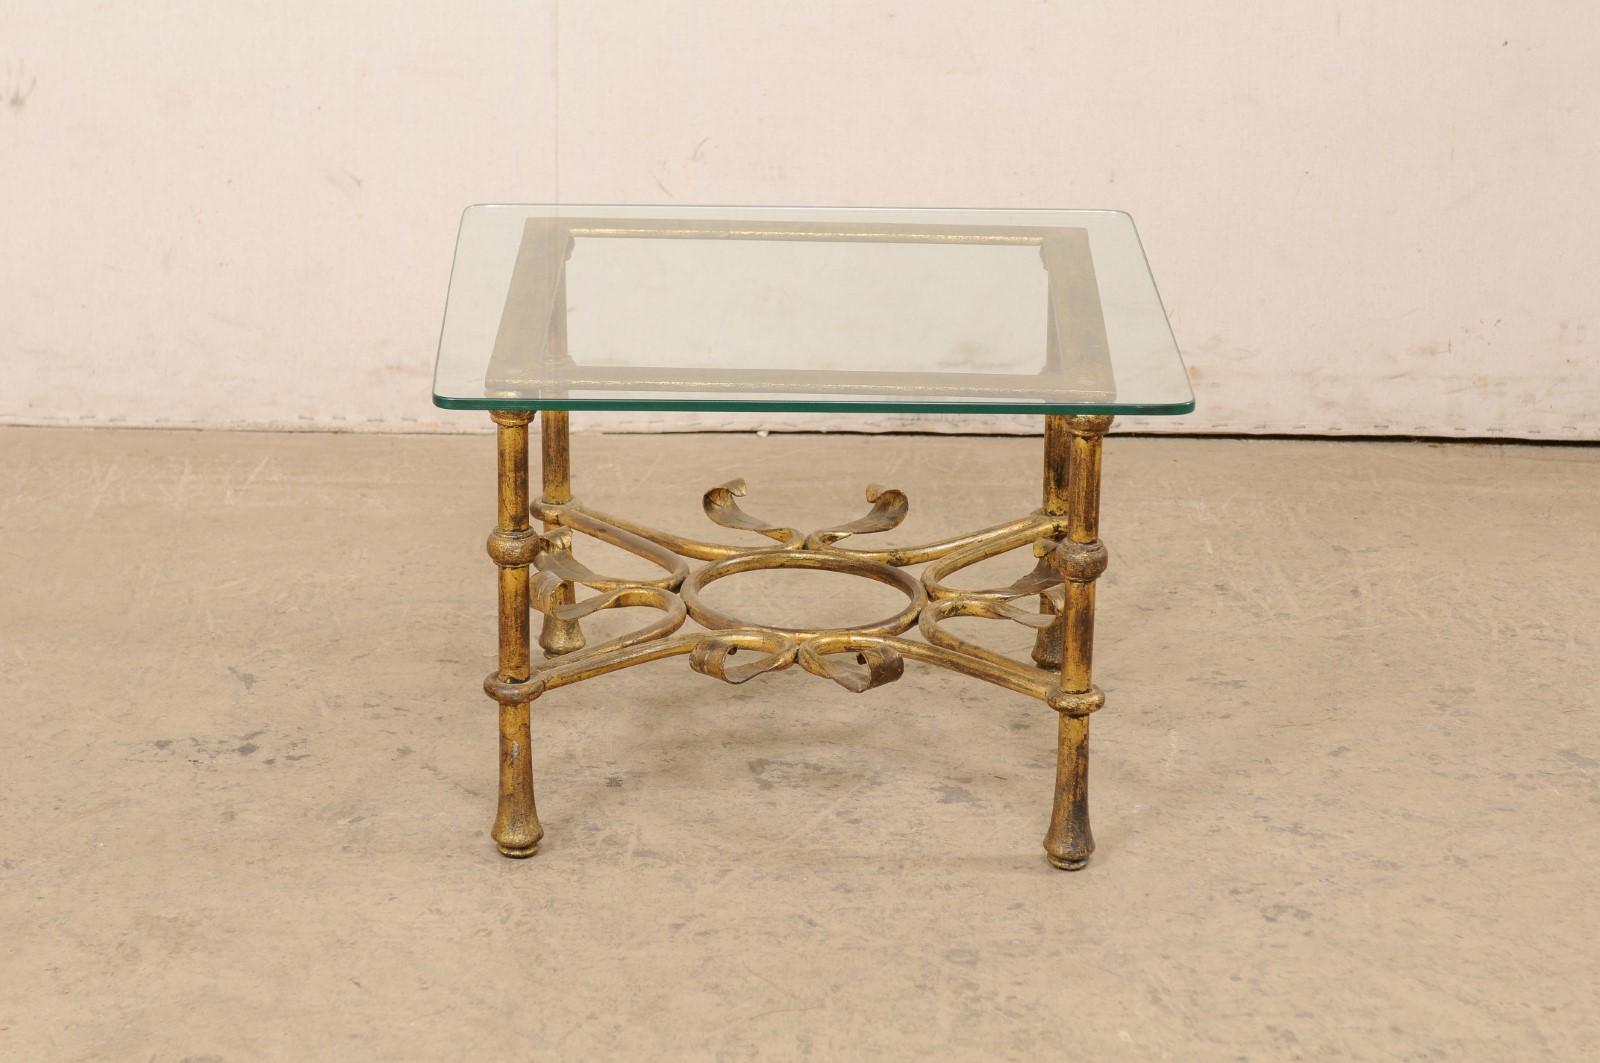 Spanish Accent Table with Gilt Iron Base & Square-Shaped Glass Top, Mid 20th C. For Sale 6